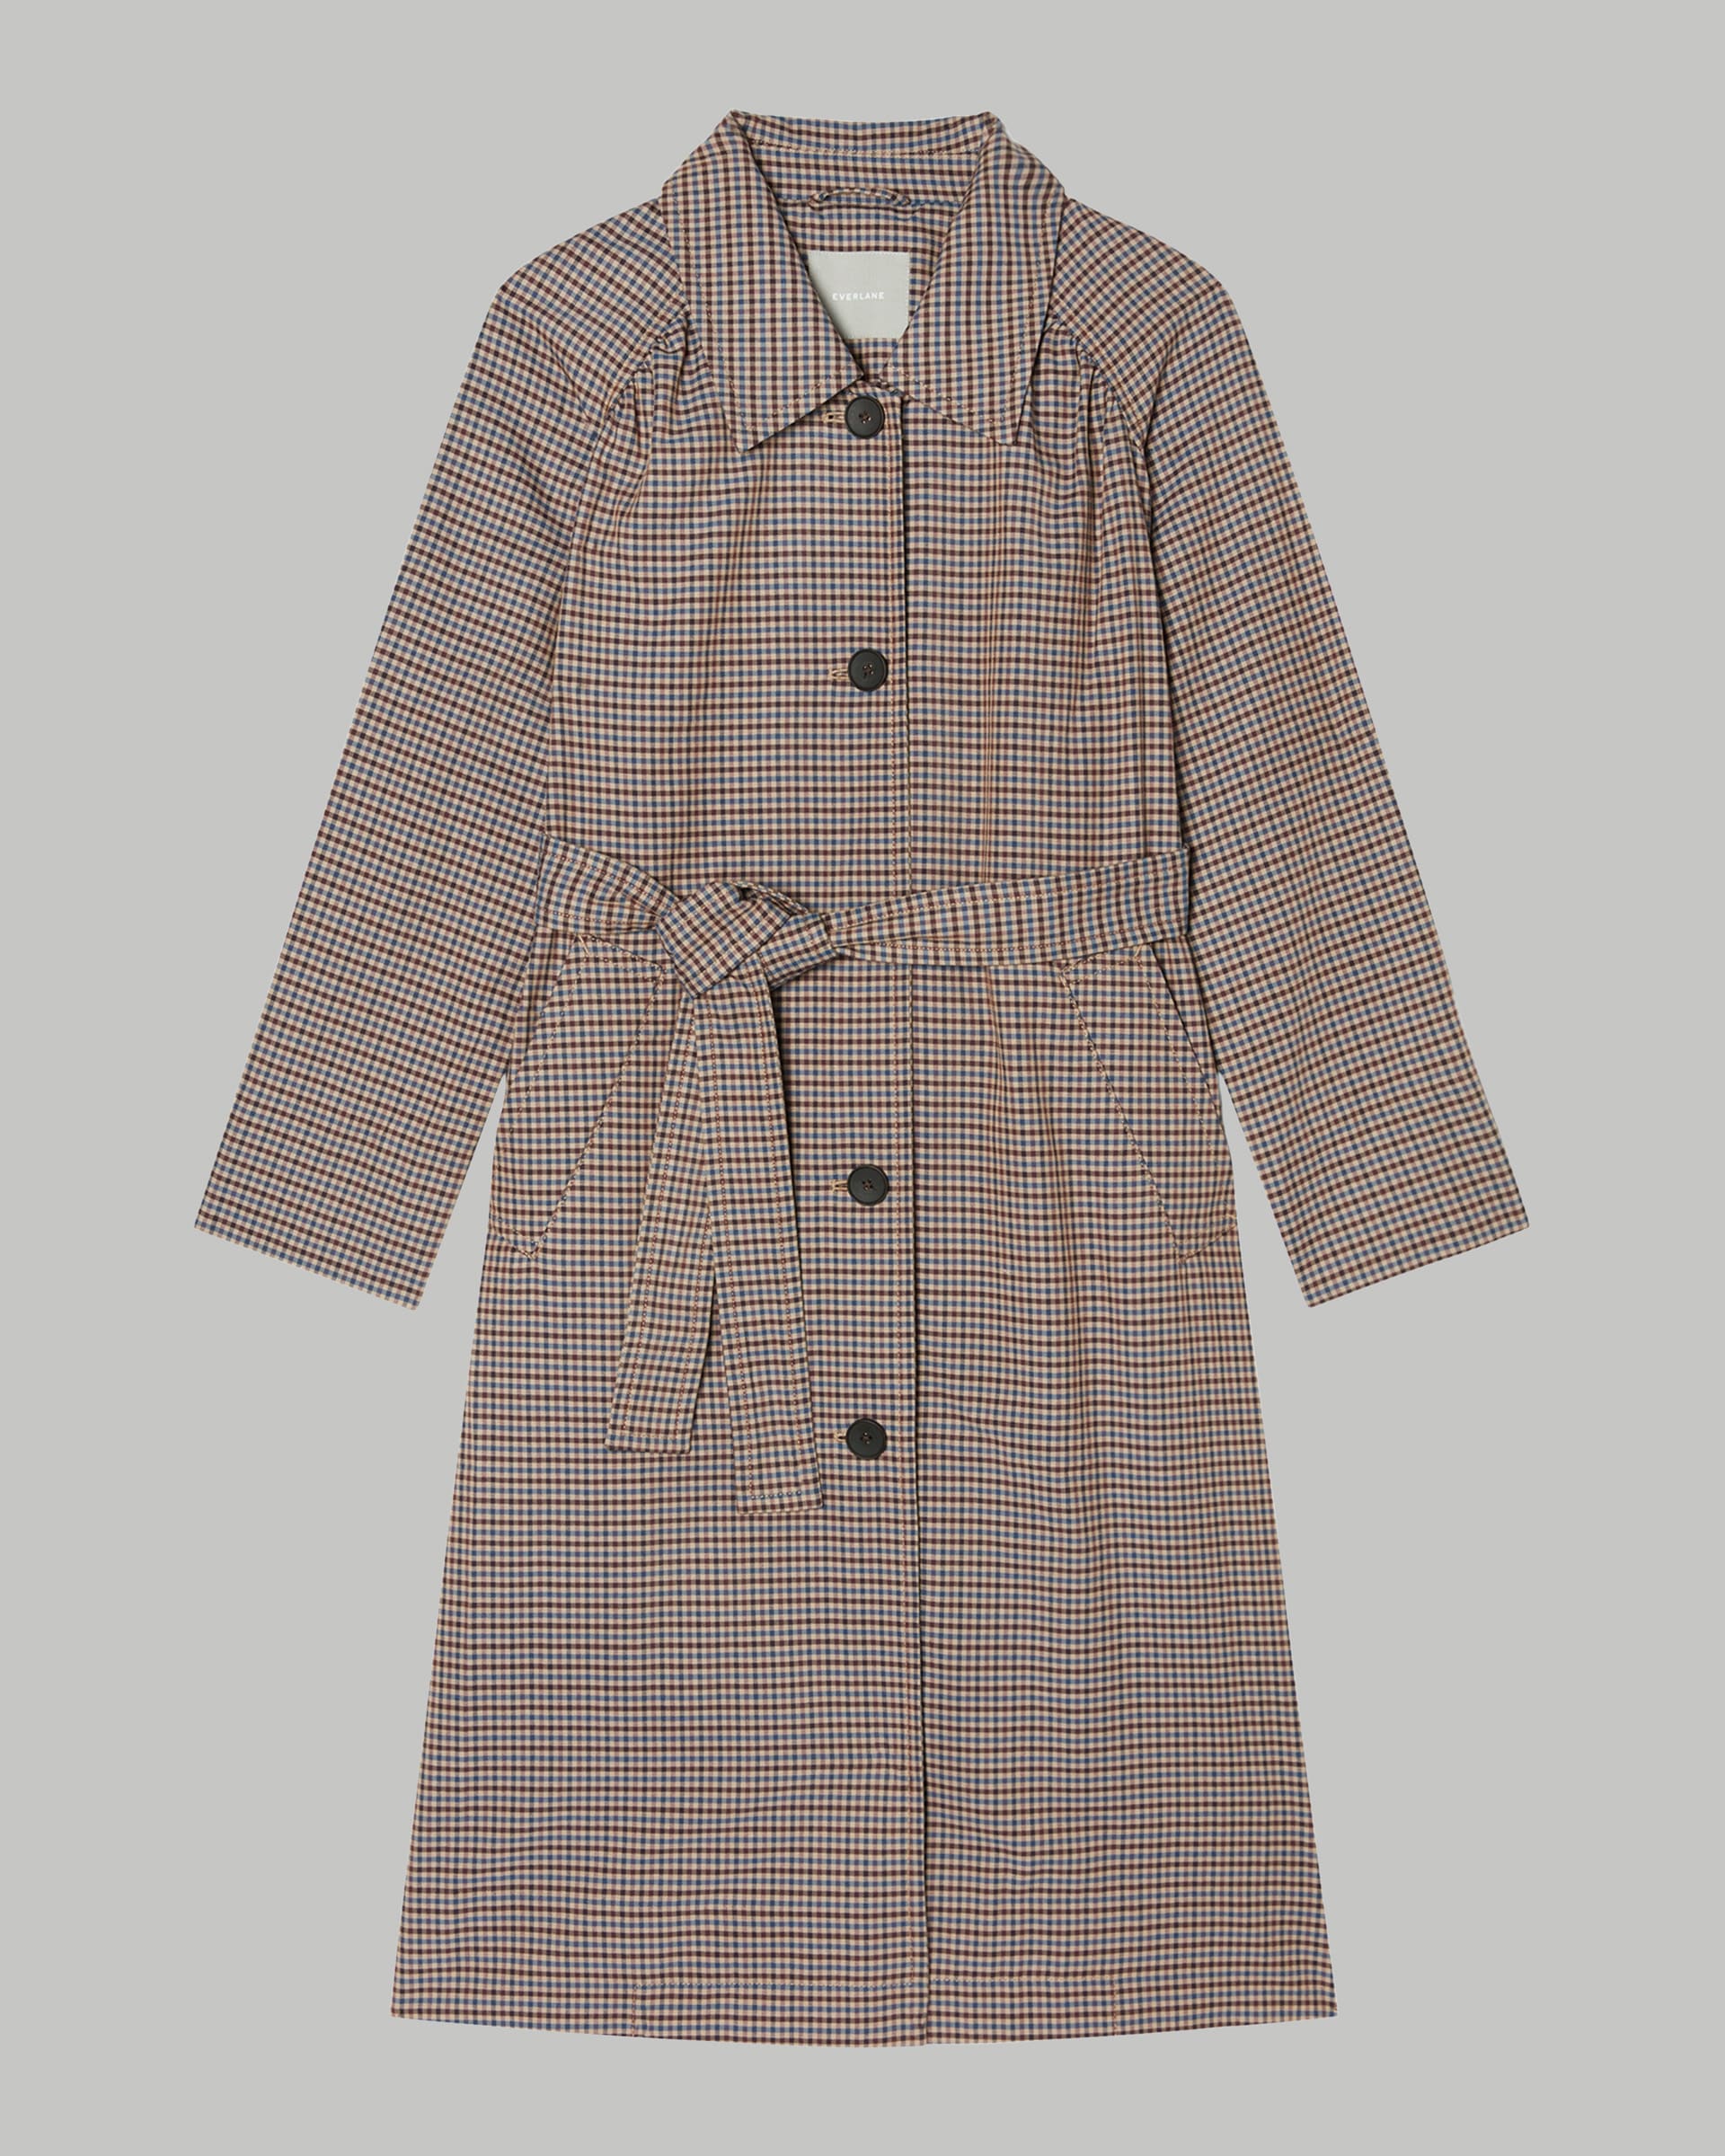 The Gathered Drape Trench Blue / Brown Houndstooth – Everlane